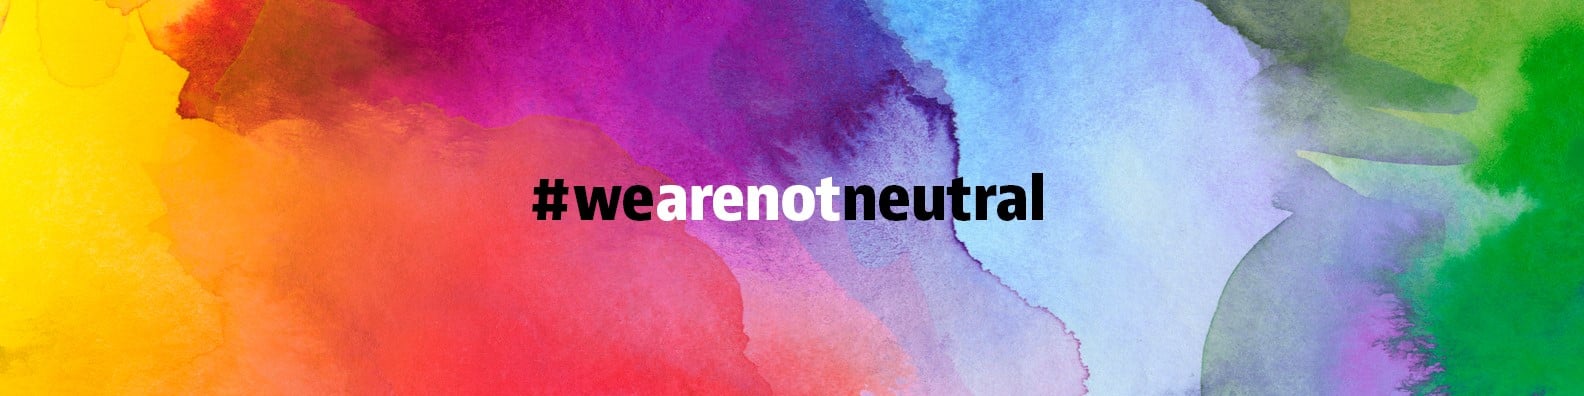 we are not neutral